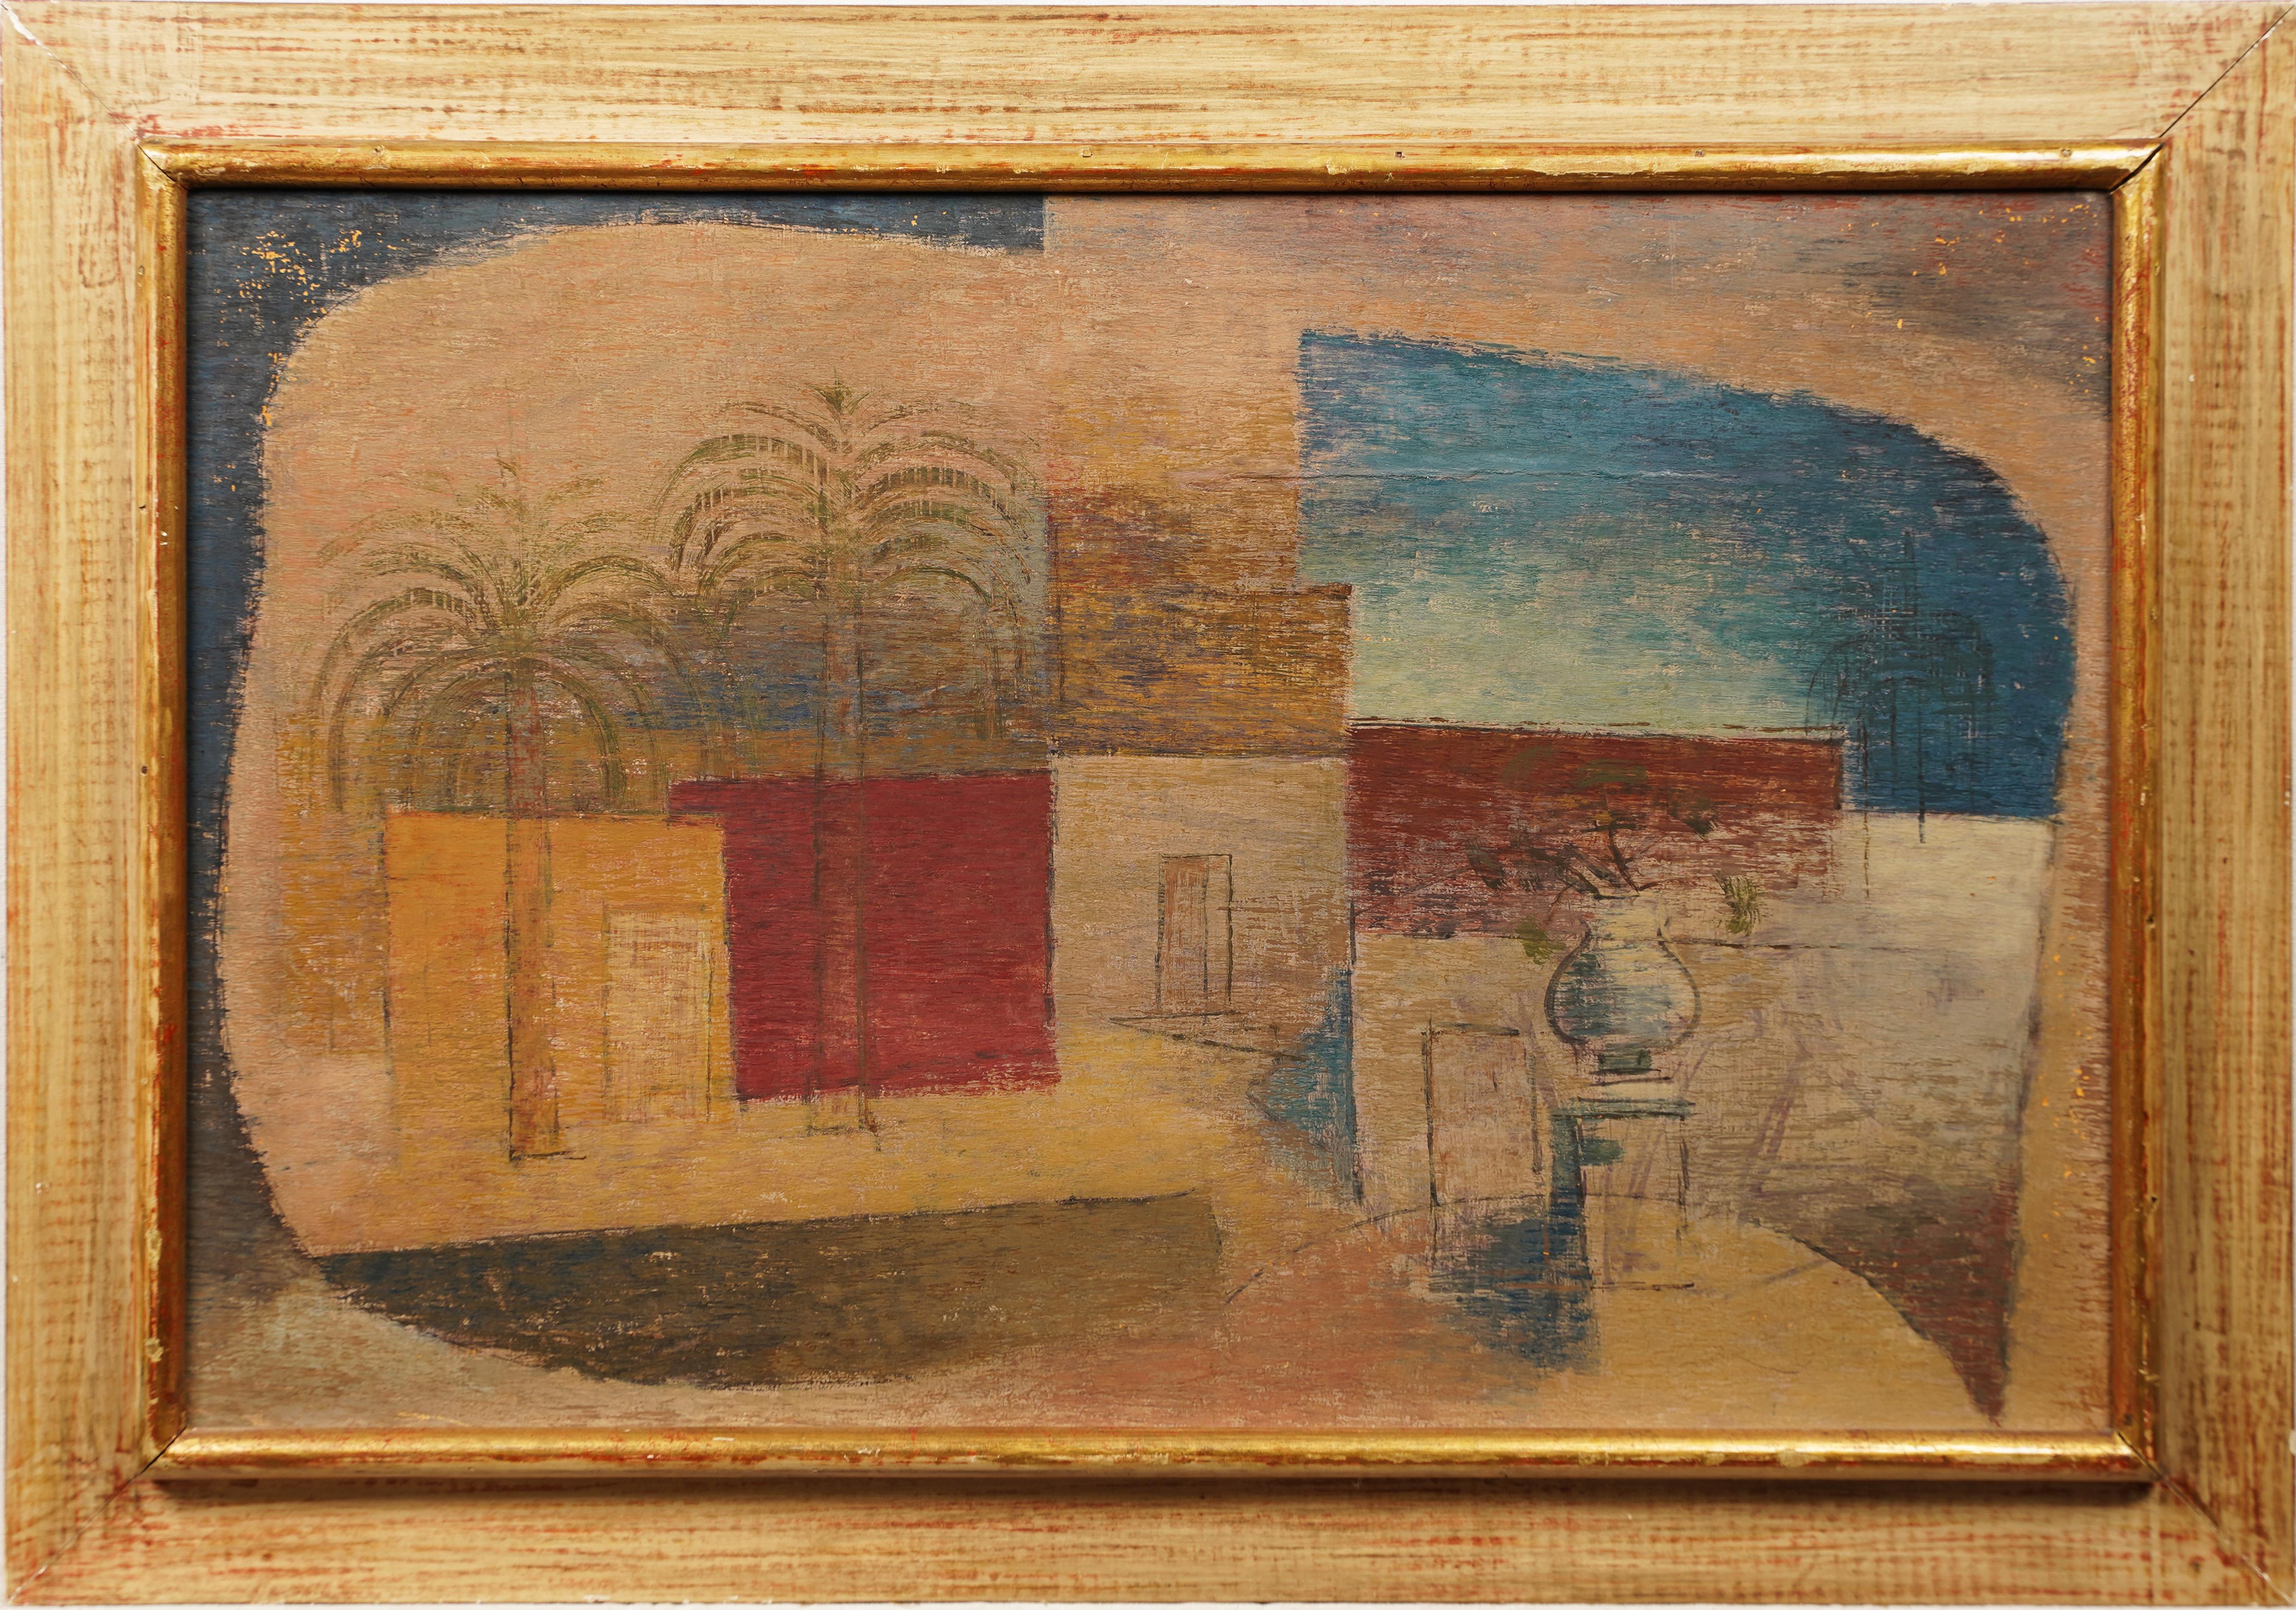 Antique American modernist signed abstract tropical oil painting.  Oil on board.  Framed.  